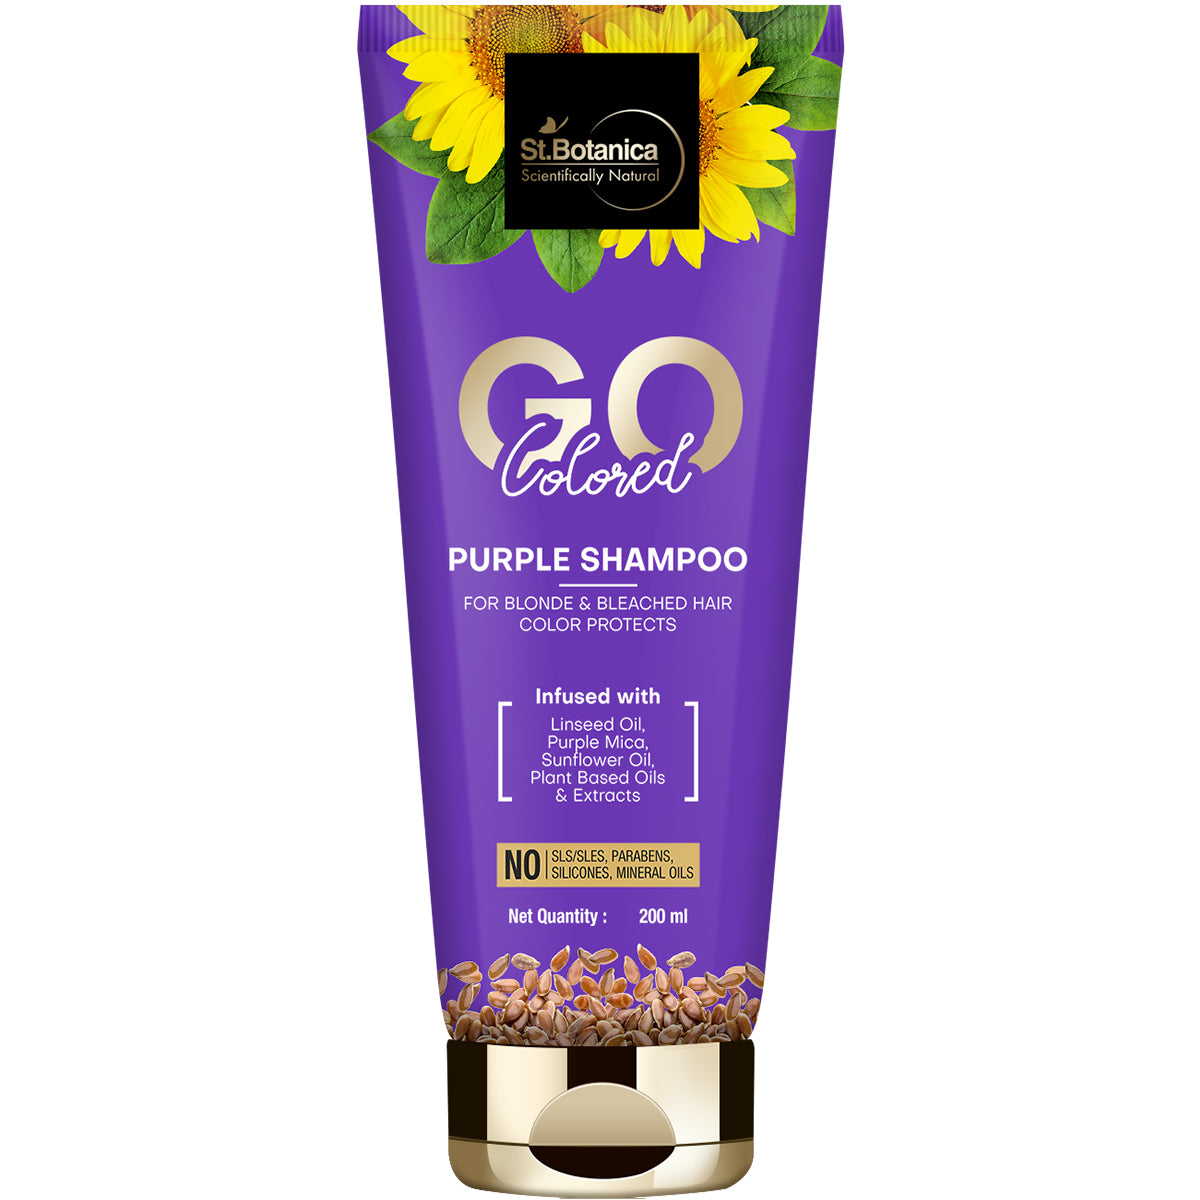 St.Botanica GO Colored Purple Hair Shampoo - With Linseed, Purple Mica, Sunflower Oil, No SLS / Sulphate, Paraben, Silicones, Colors, 200 ml